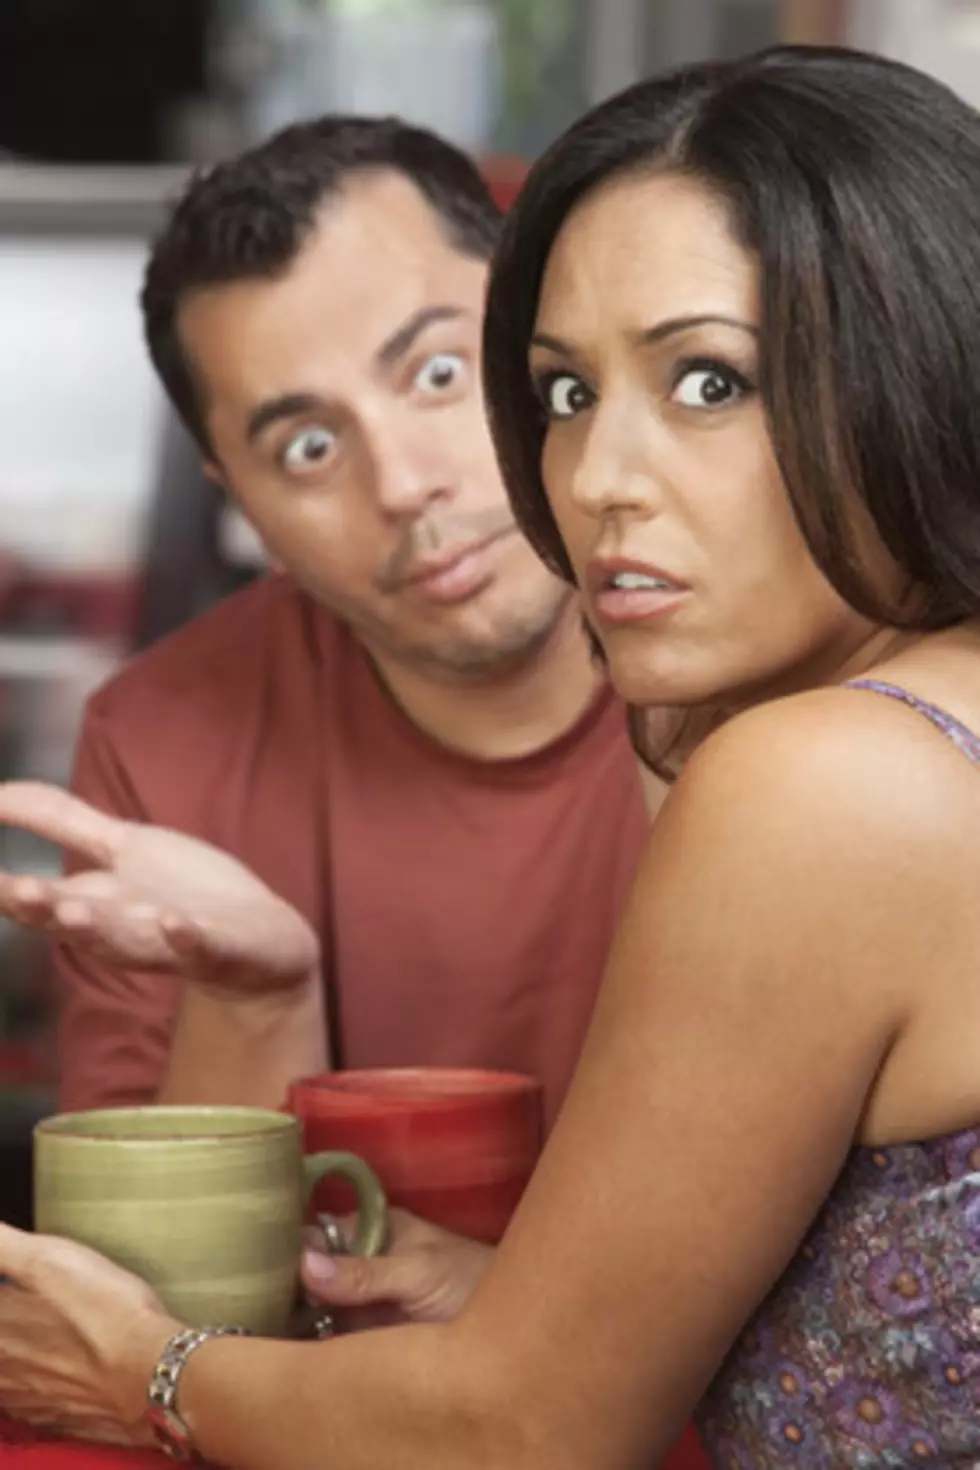 Husbands More Likely To Divorce Wives Who Fall Ill